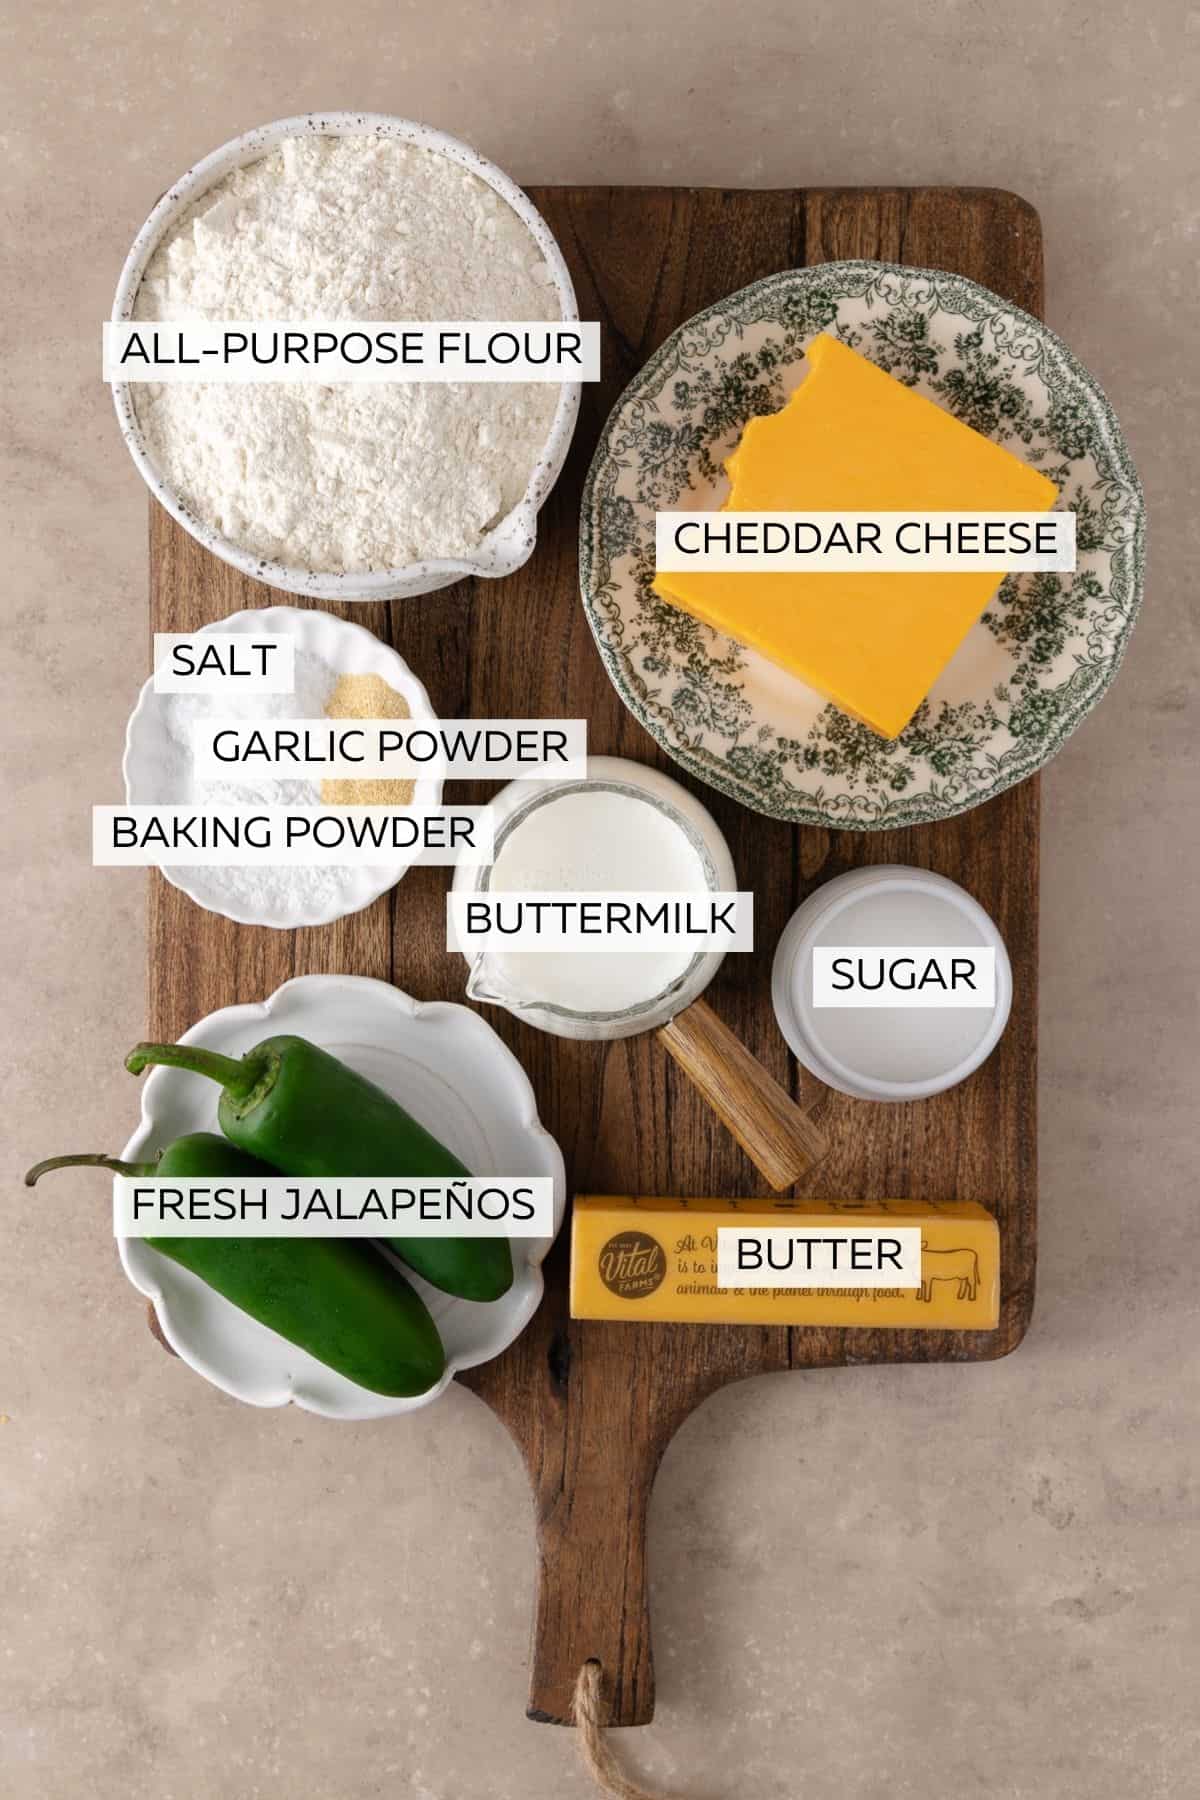 Jalapeno Cheddar Biscuits ingredients, which include, all-purpose flour, baking powder, sugar, salt, garlic powder, cheddar cheese, butter, buttermilk and jalapenos.